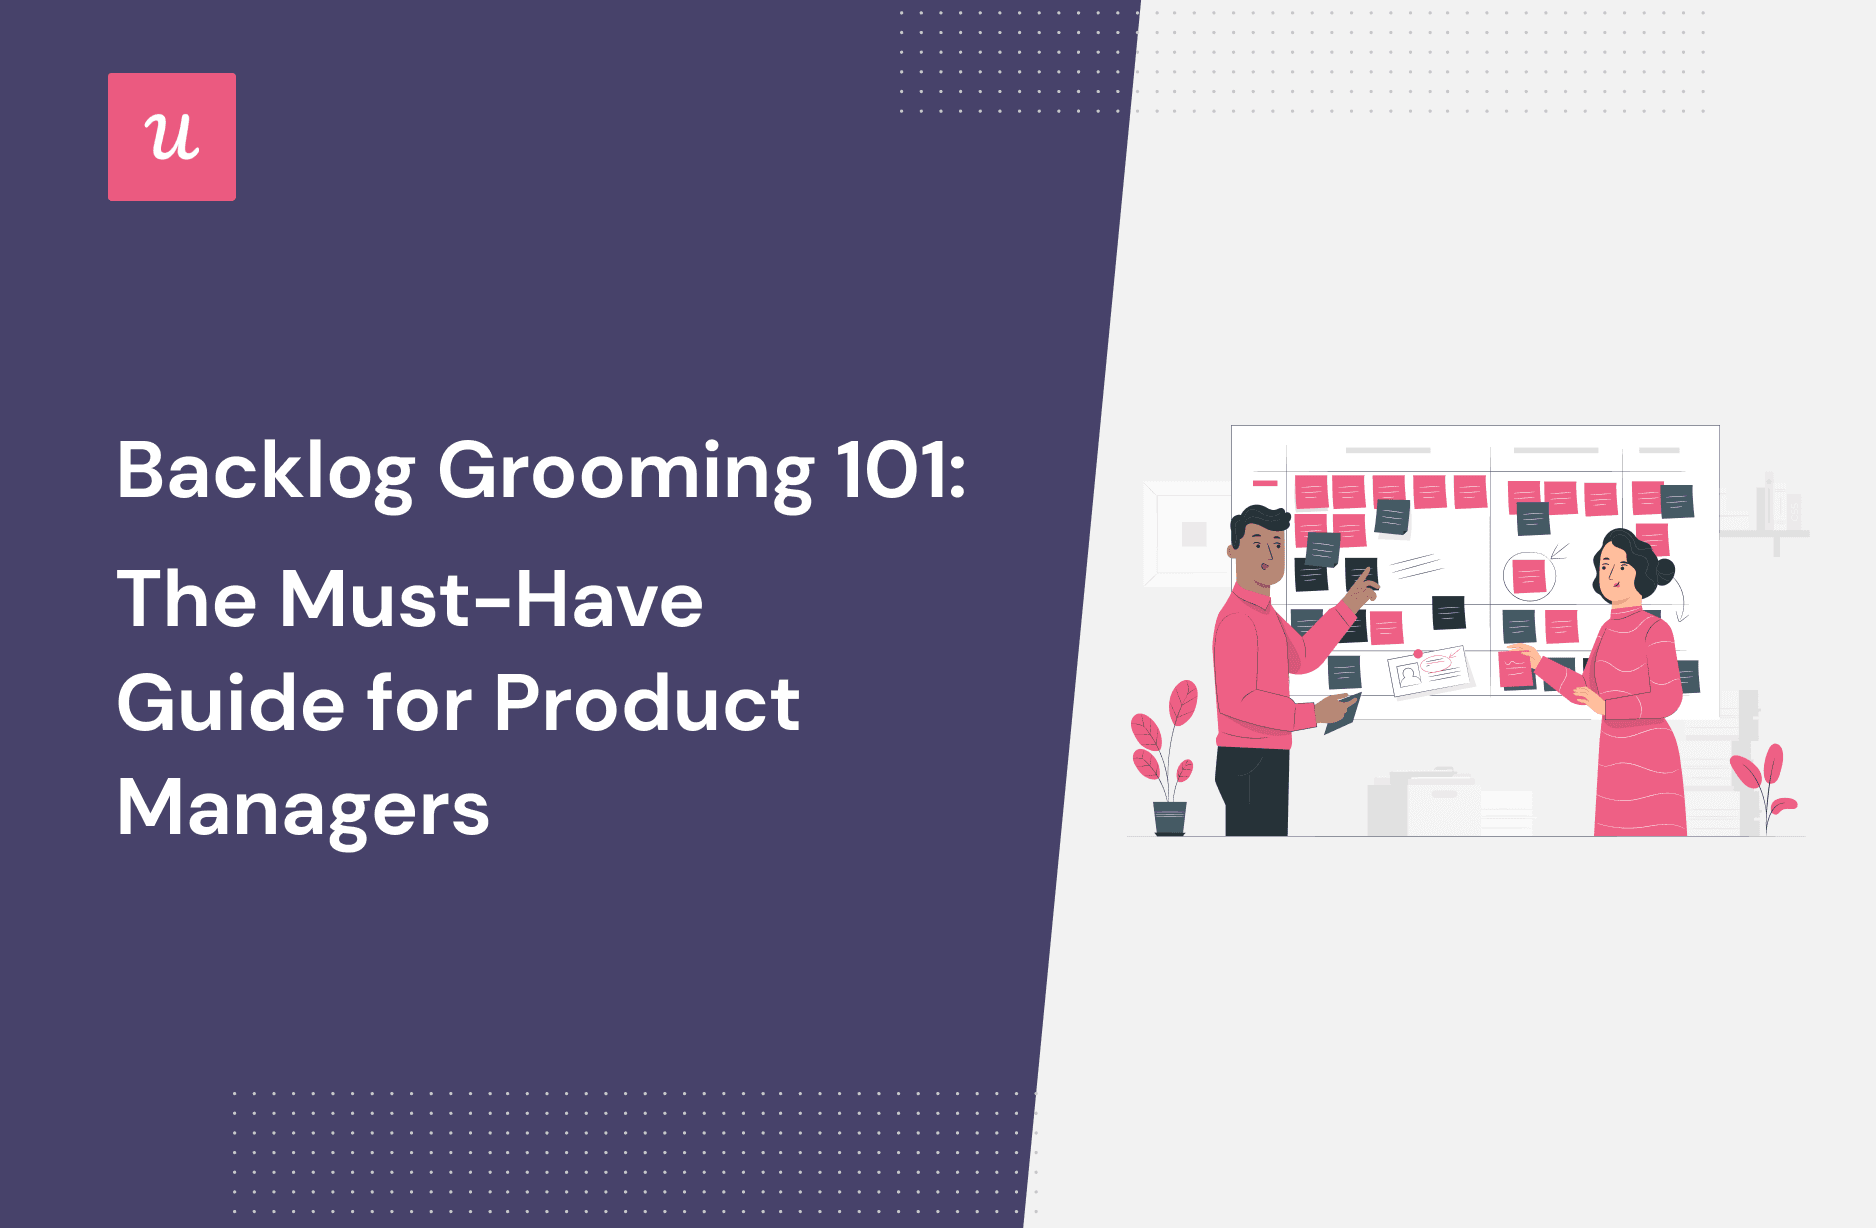 Backlog Grooming 101: The Must-Have Guide for Product Managers